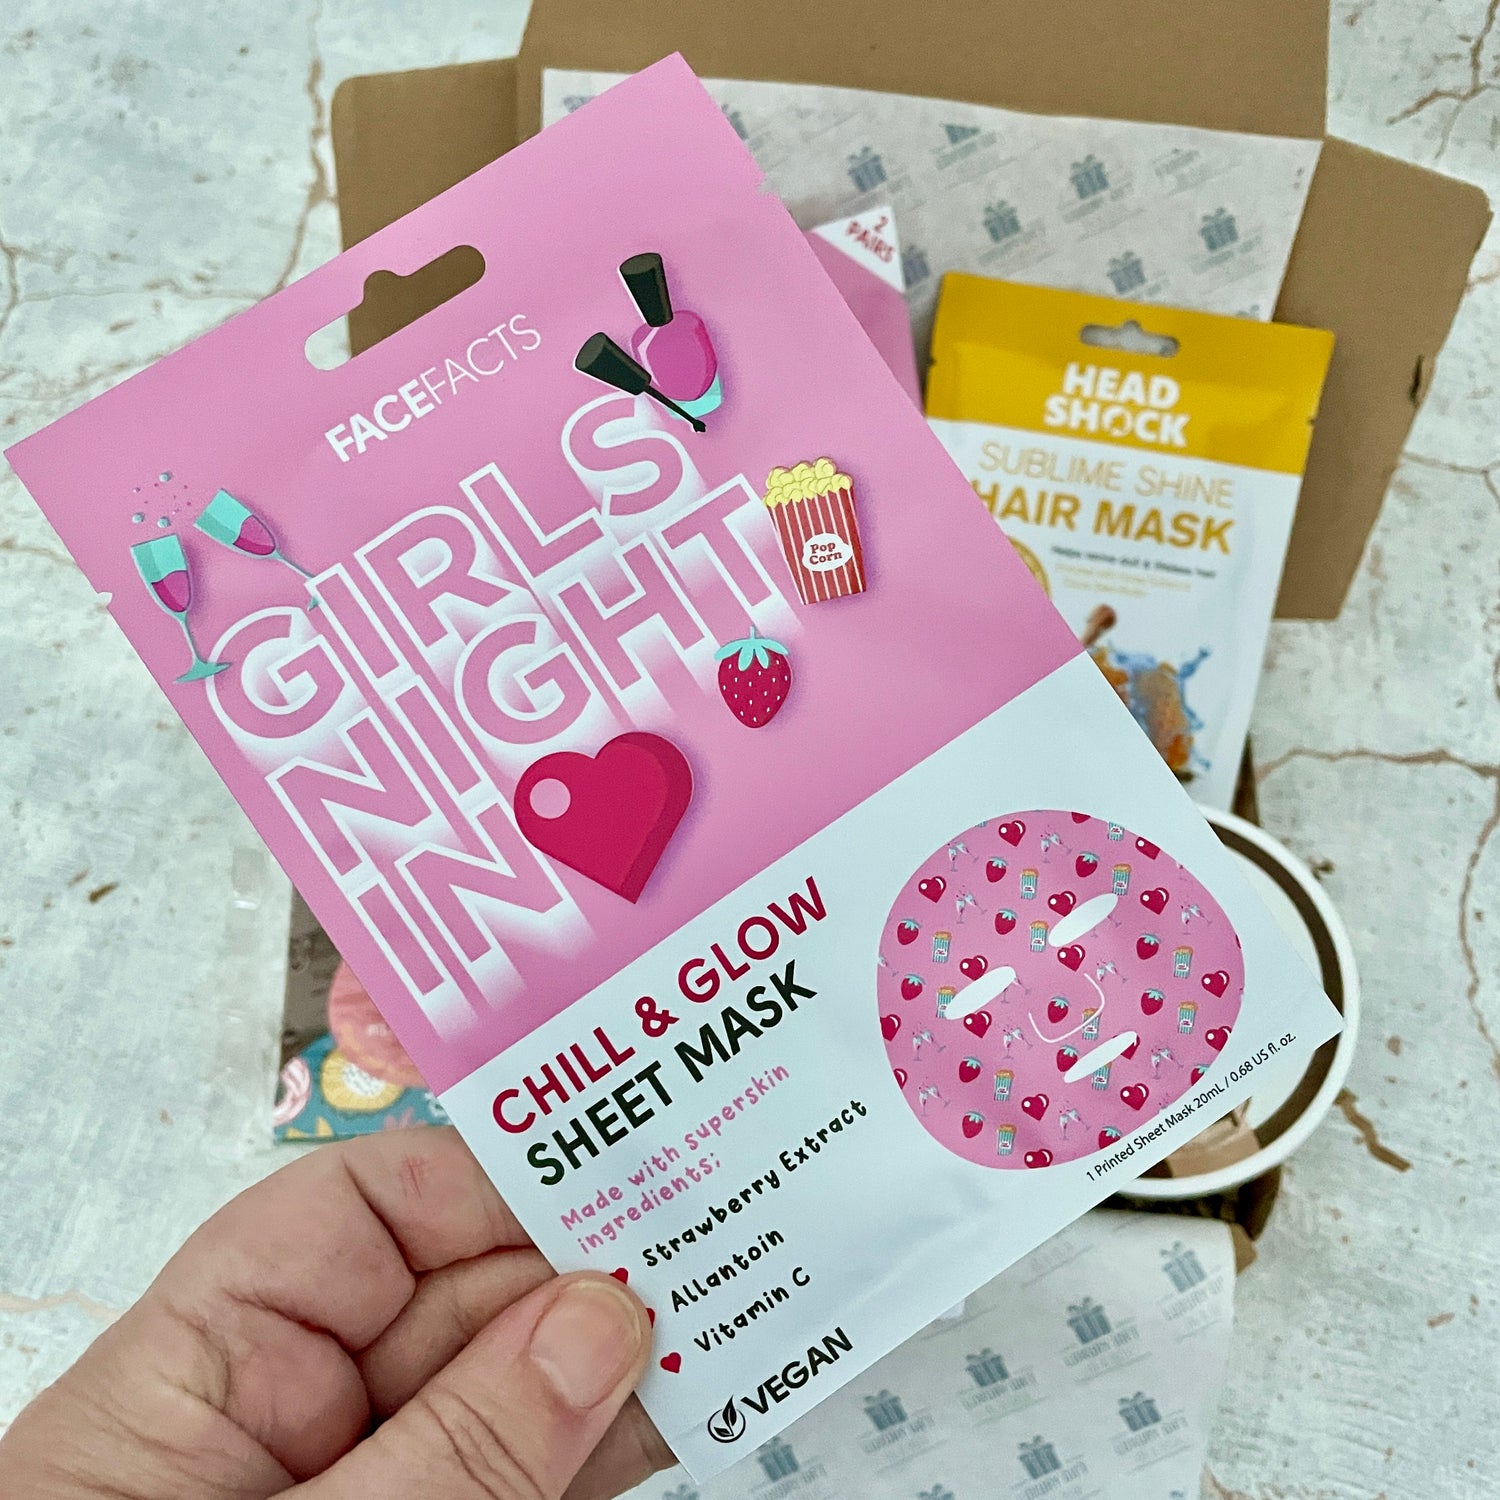  Girls Night In Chill and Glow Sheet Mask